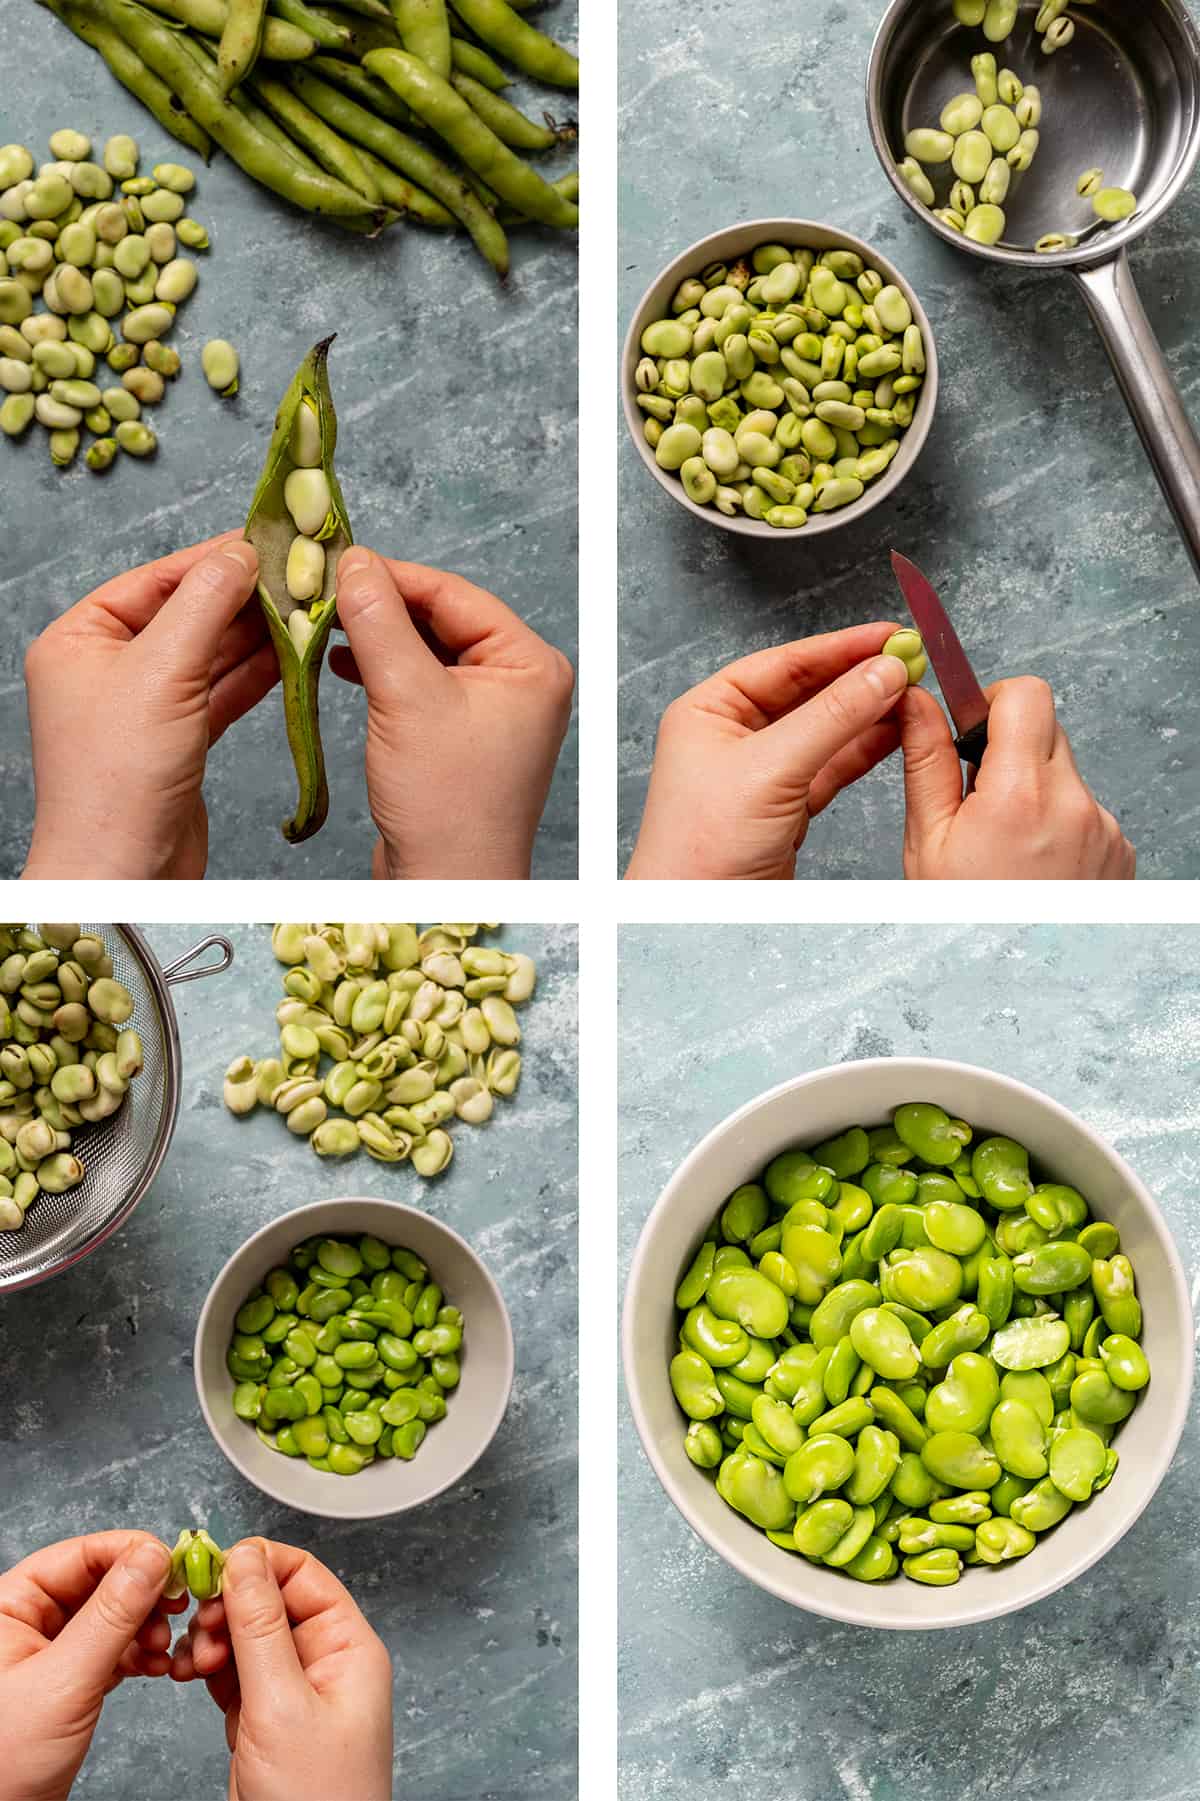 A collage of four pictures showing the steps of peeling fava beans.